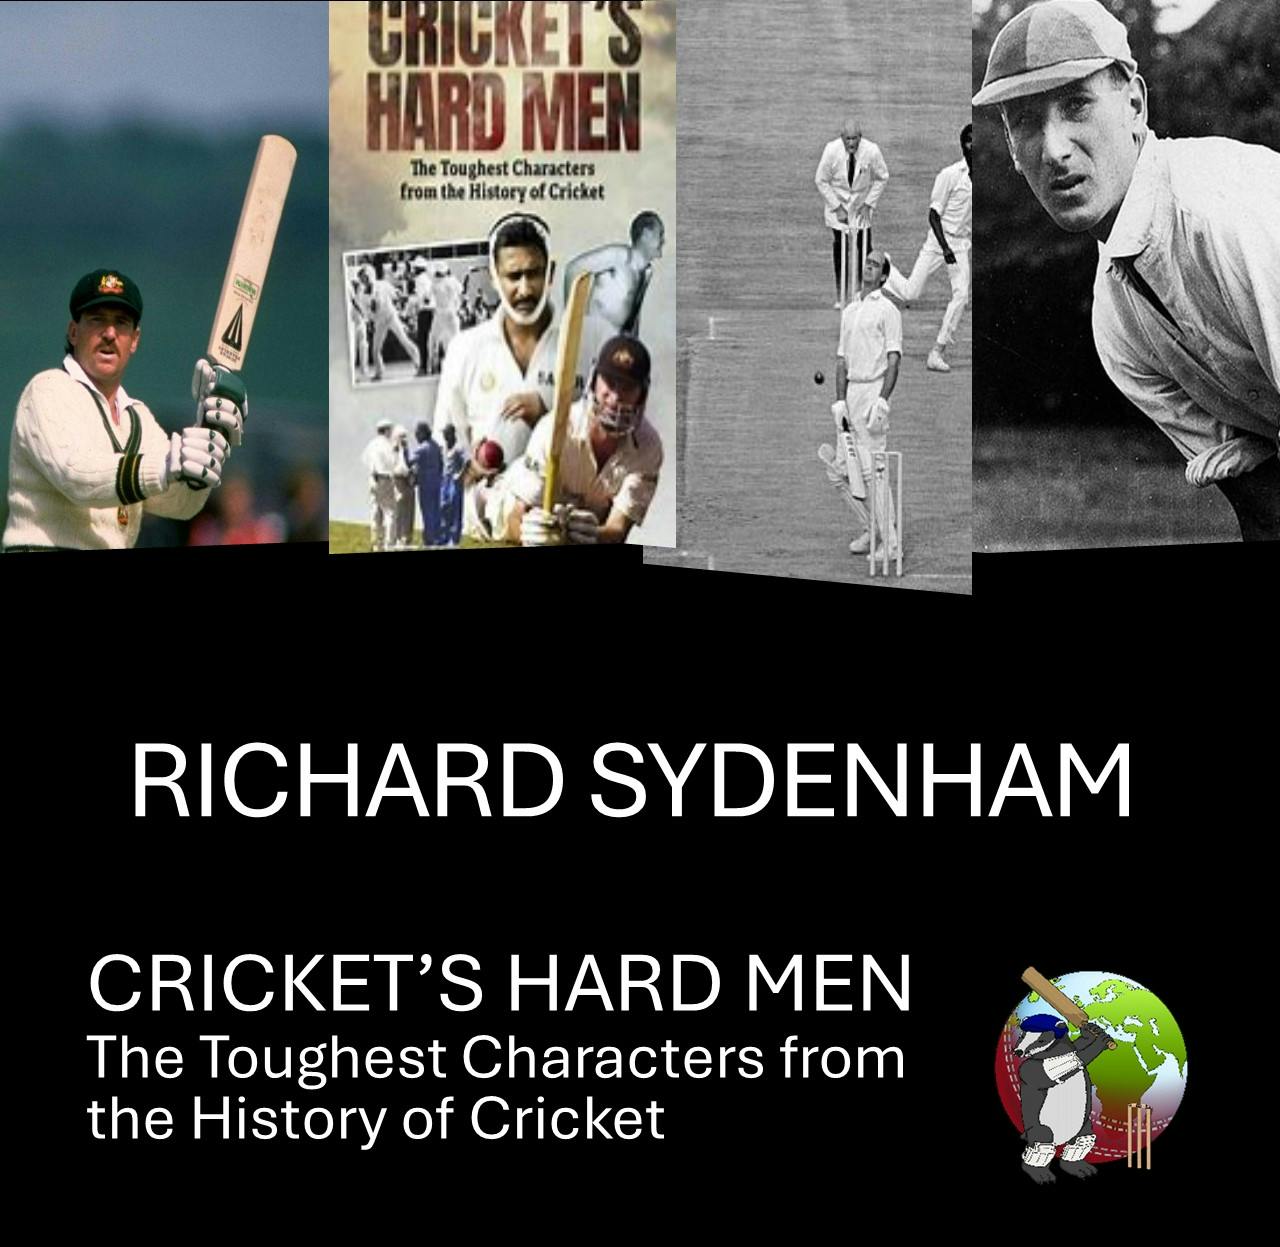 574: Richard Sydenham: CRICKET'S HARD MEN - 'The Toughest Characters from the History of Cricket'